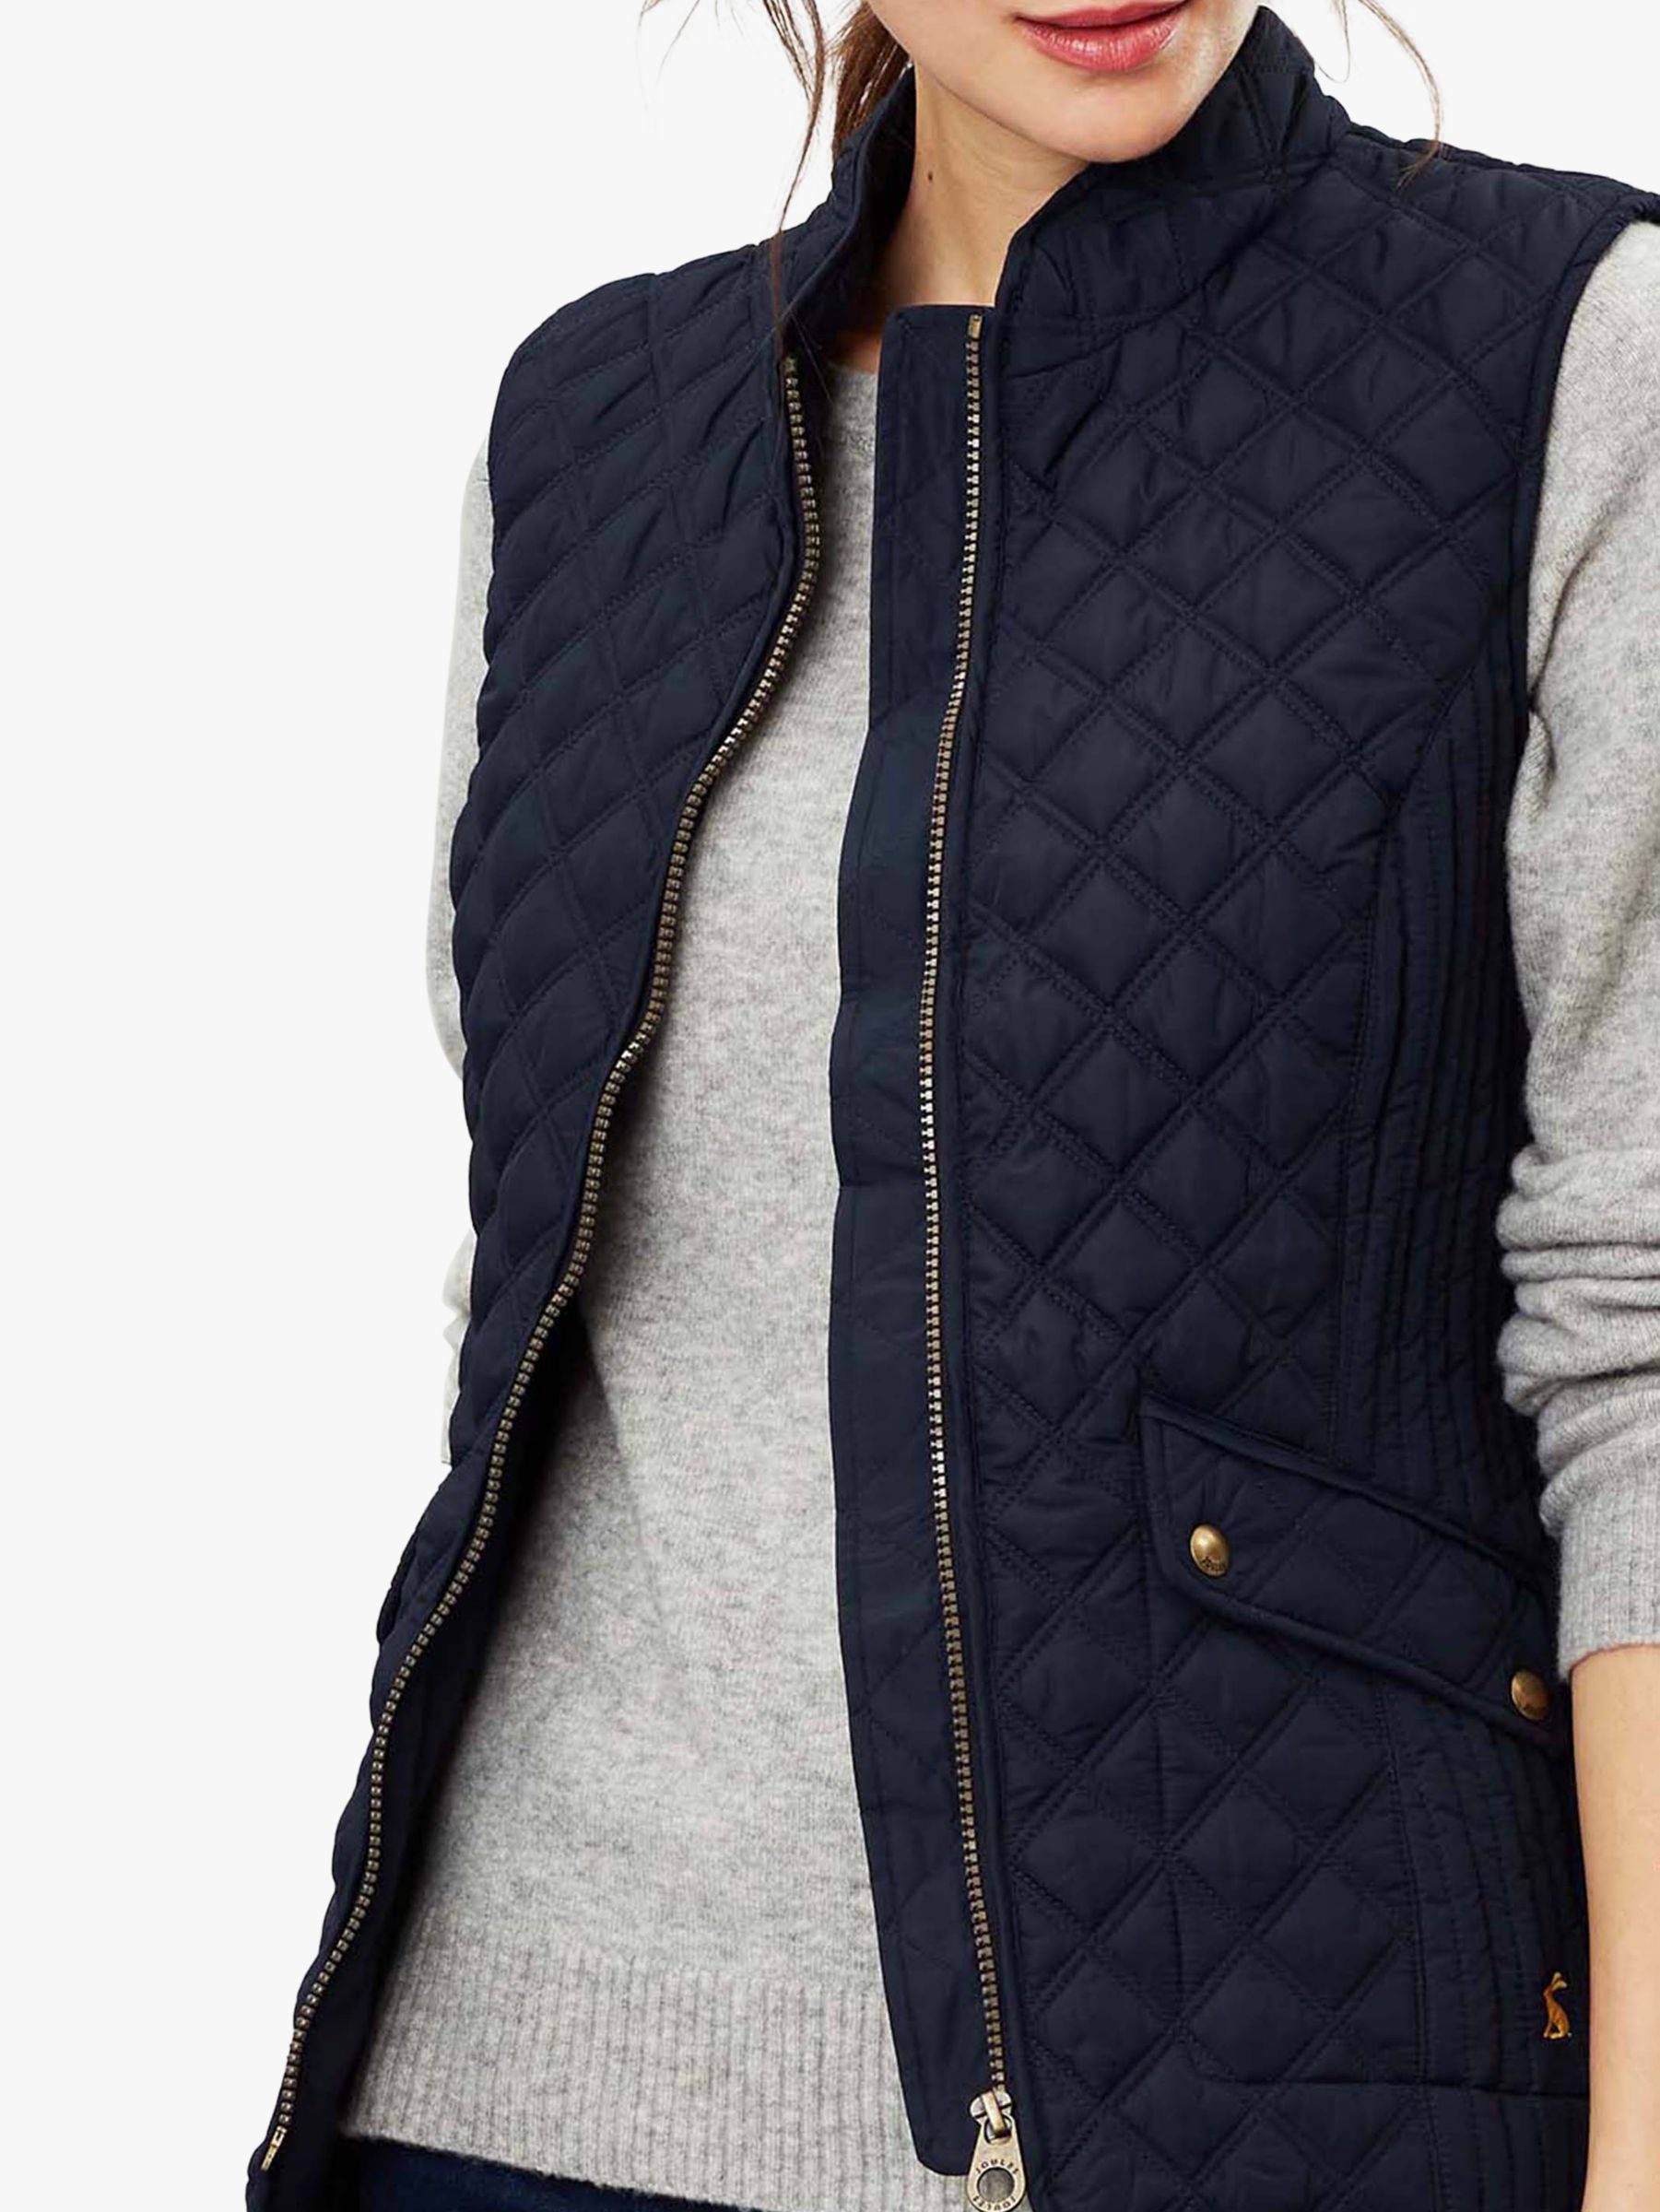 Joules Minx Quilted Gilet, Marine Navy at John Lewis & Partners